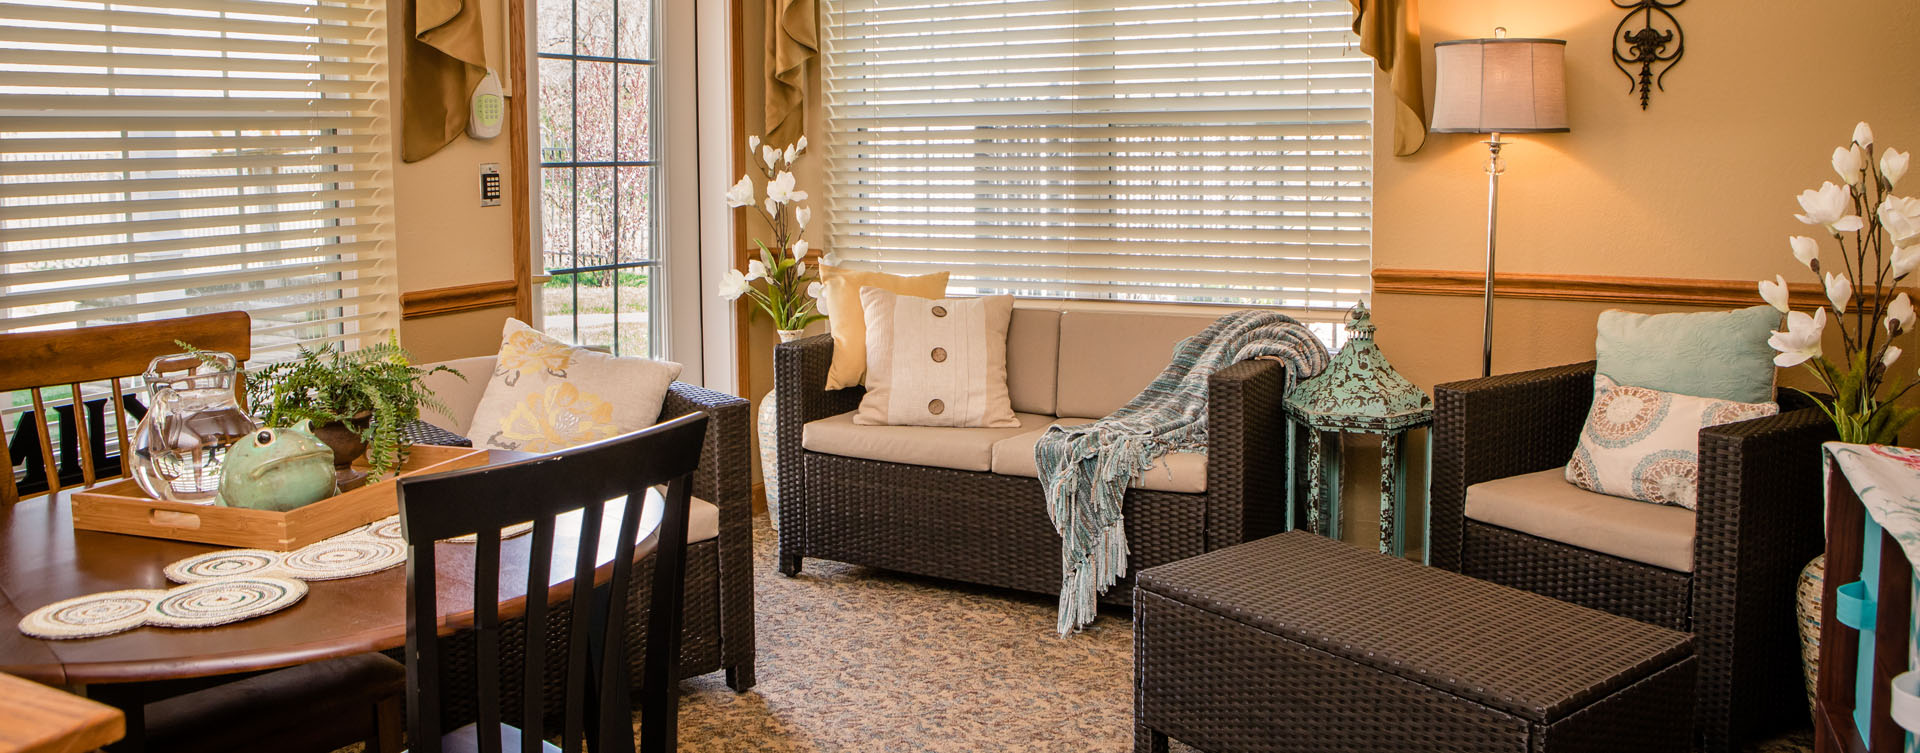 Relax in the warmth of the sunroom at Bickford of Macomb